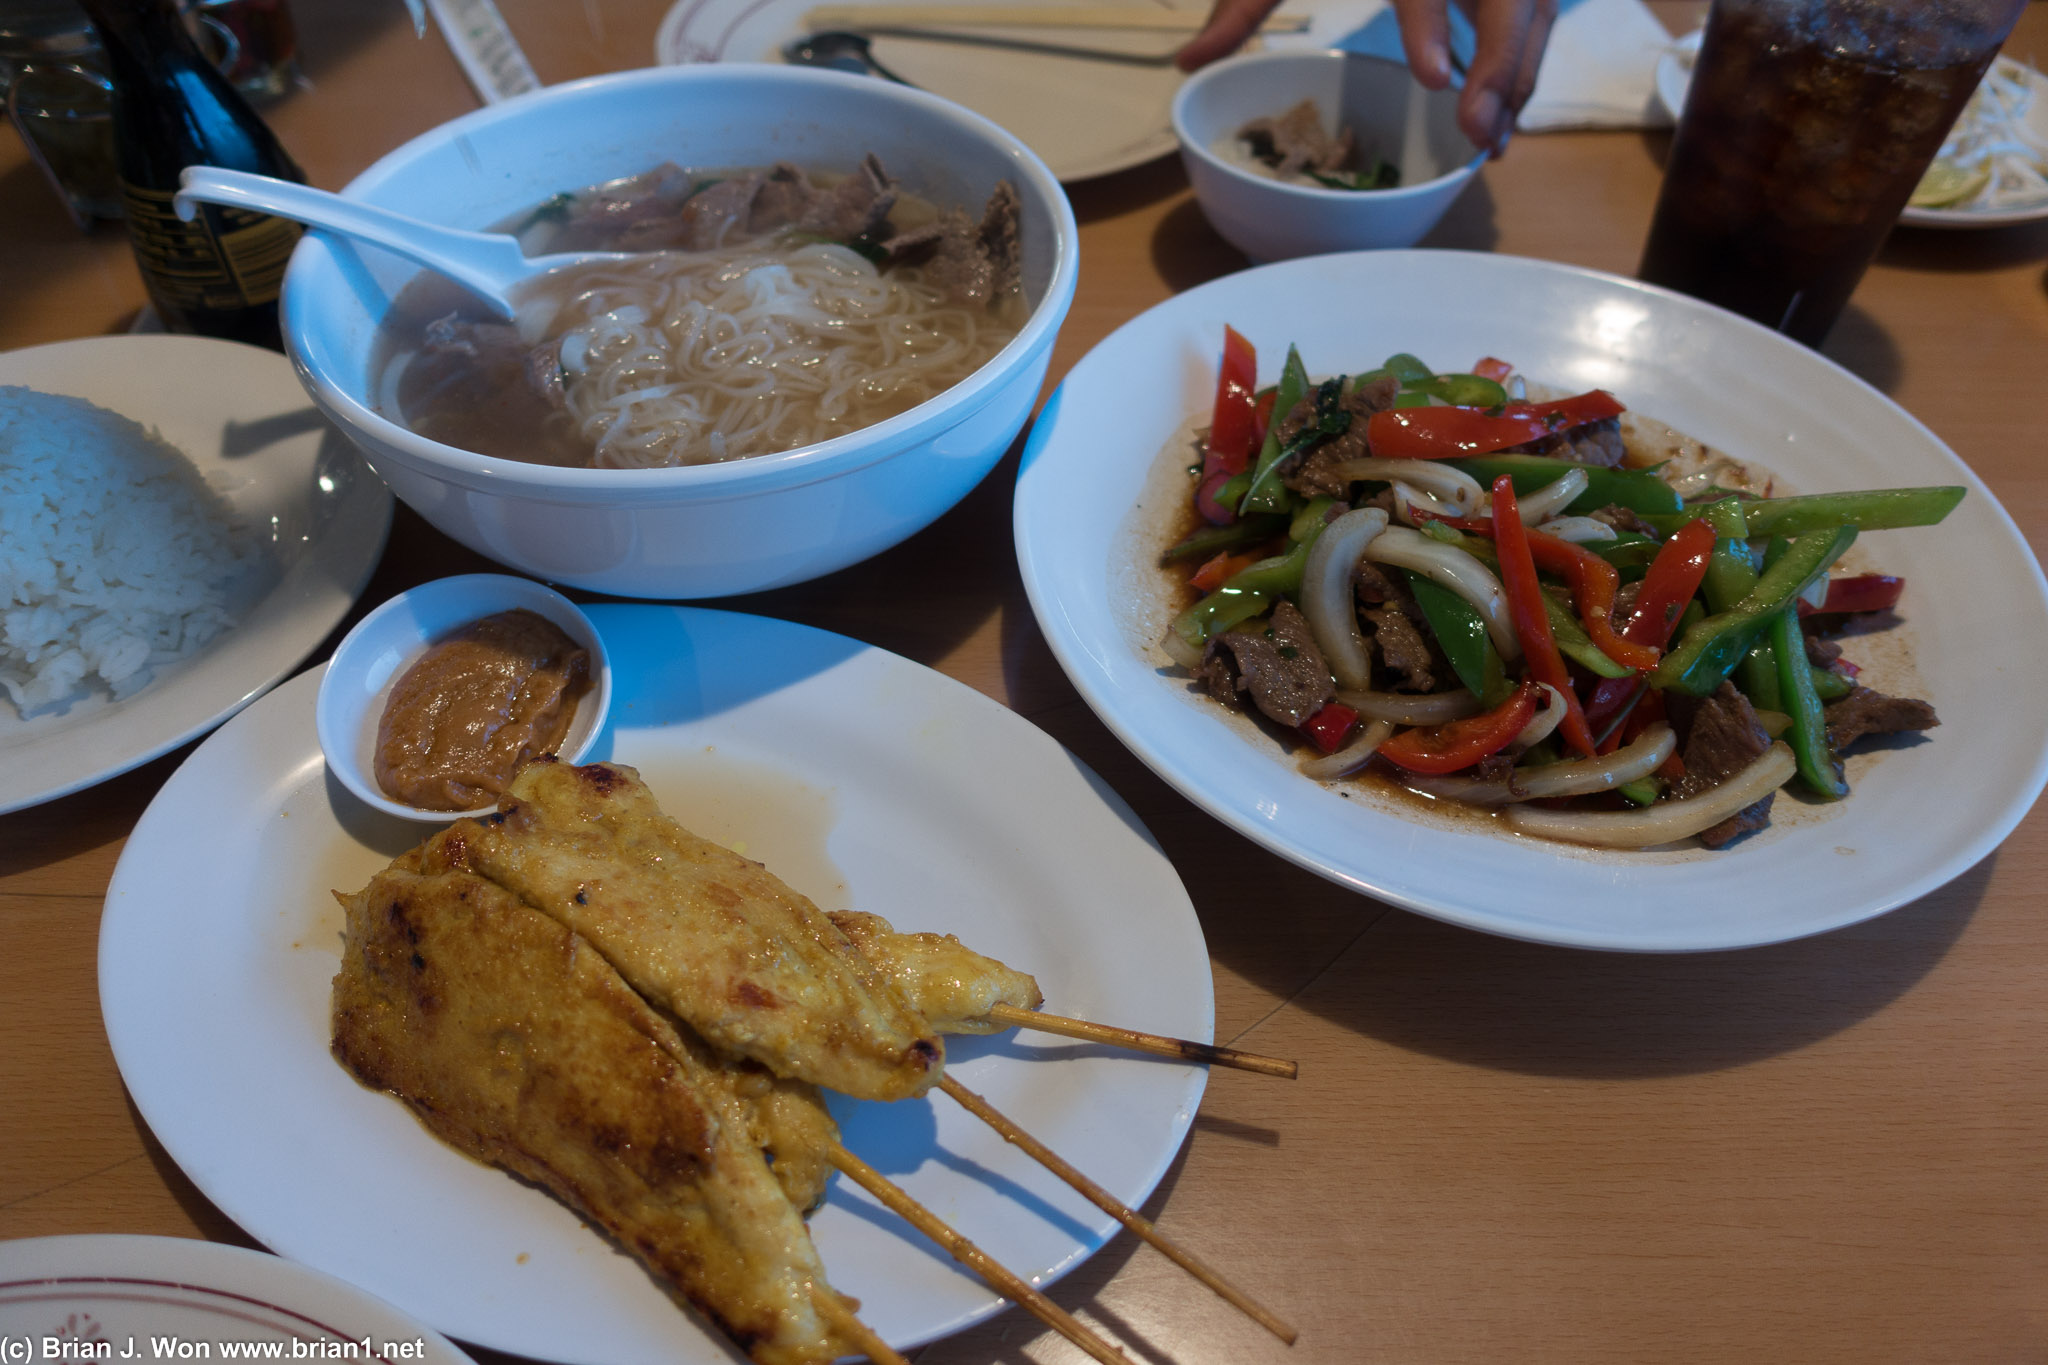 Ginger beef and chicken satay. It's Mojave, what did you expect?